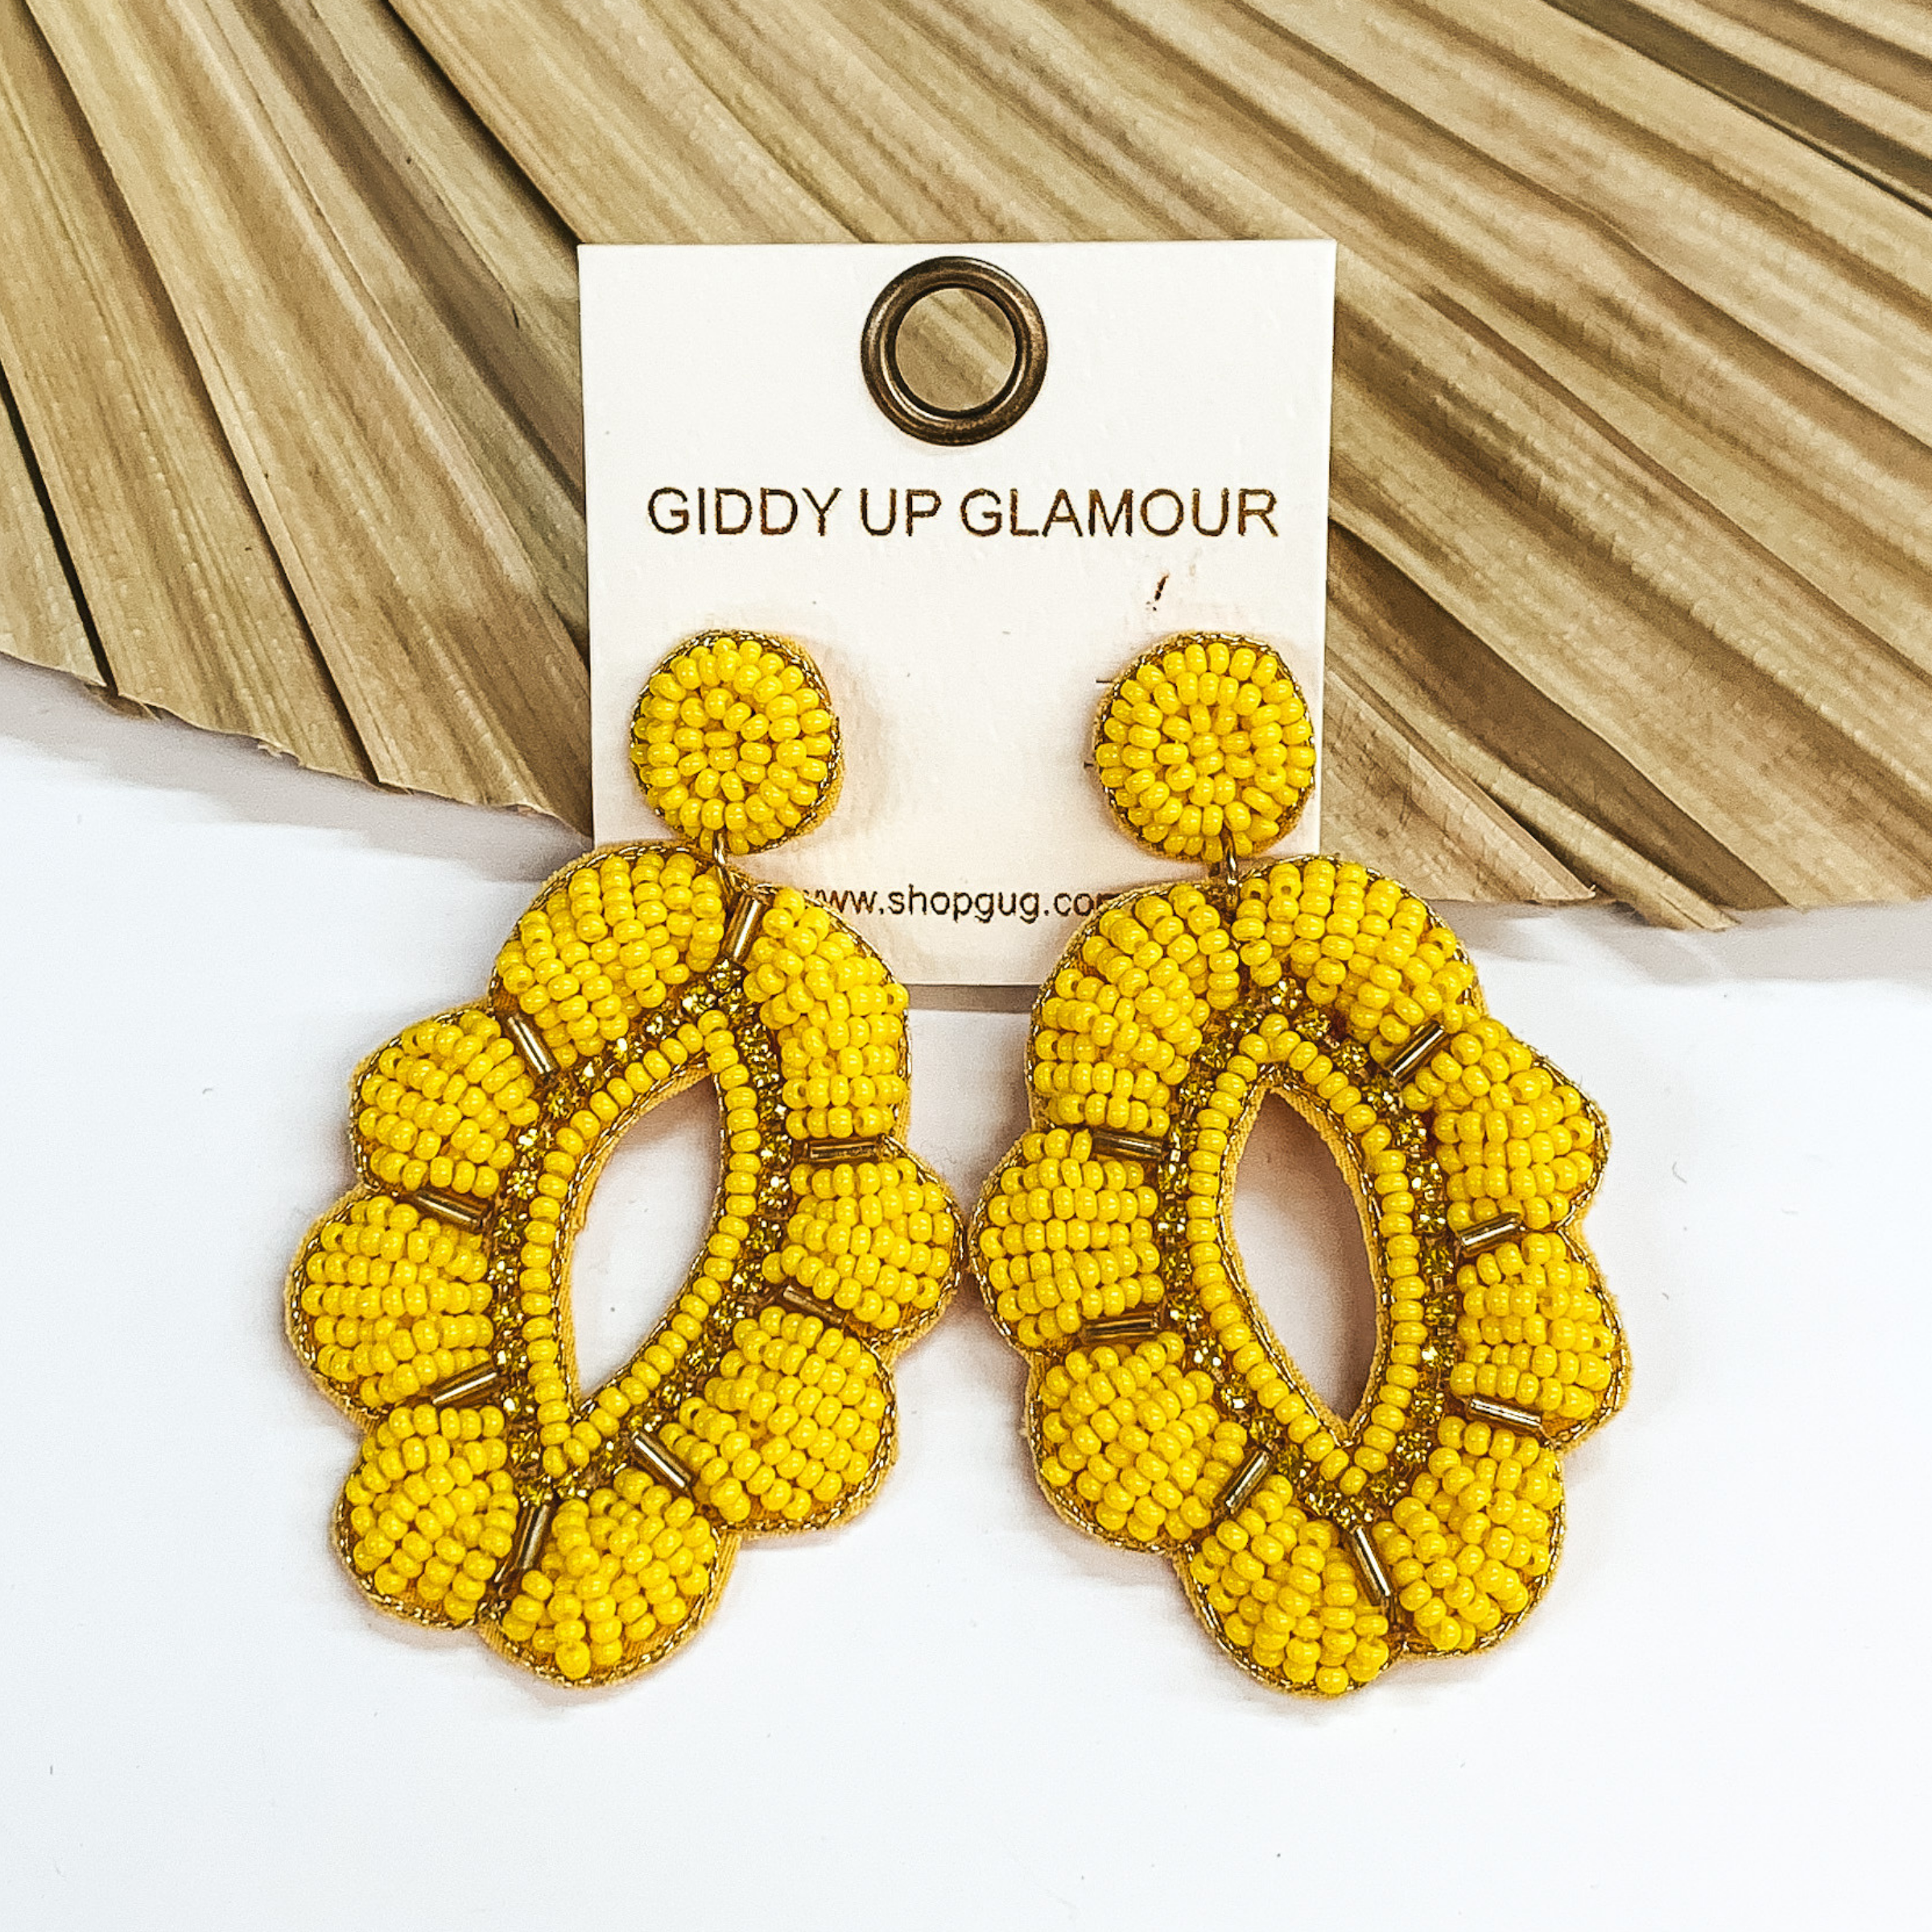 Yellow beaded earrings in a floral teardrop shape  with gold outline. Long gold beads in between  each petal with yellow, shiny beads around in  the middle.  Taken in a white background with a light brown decor piece.